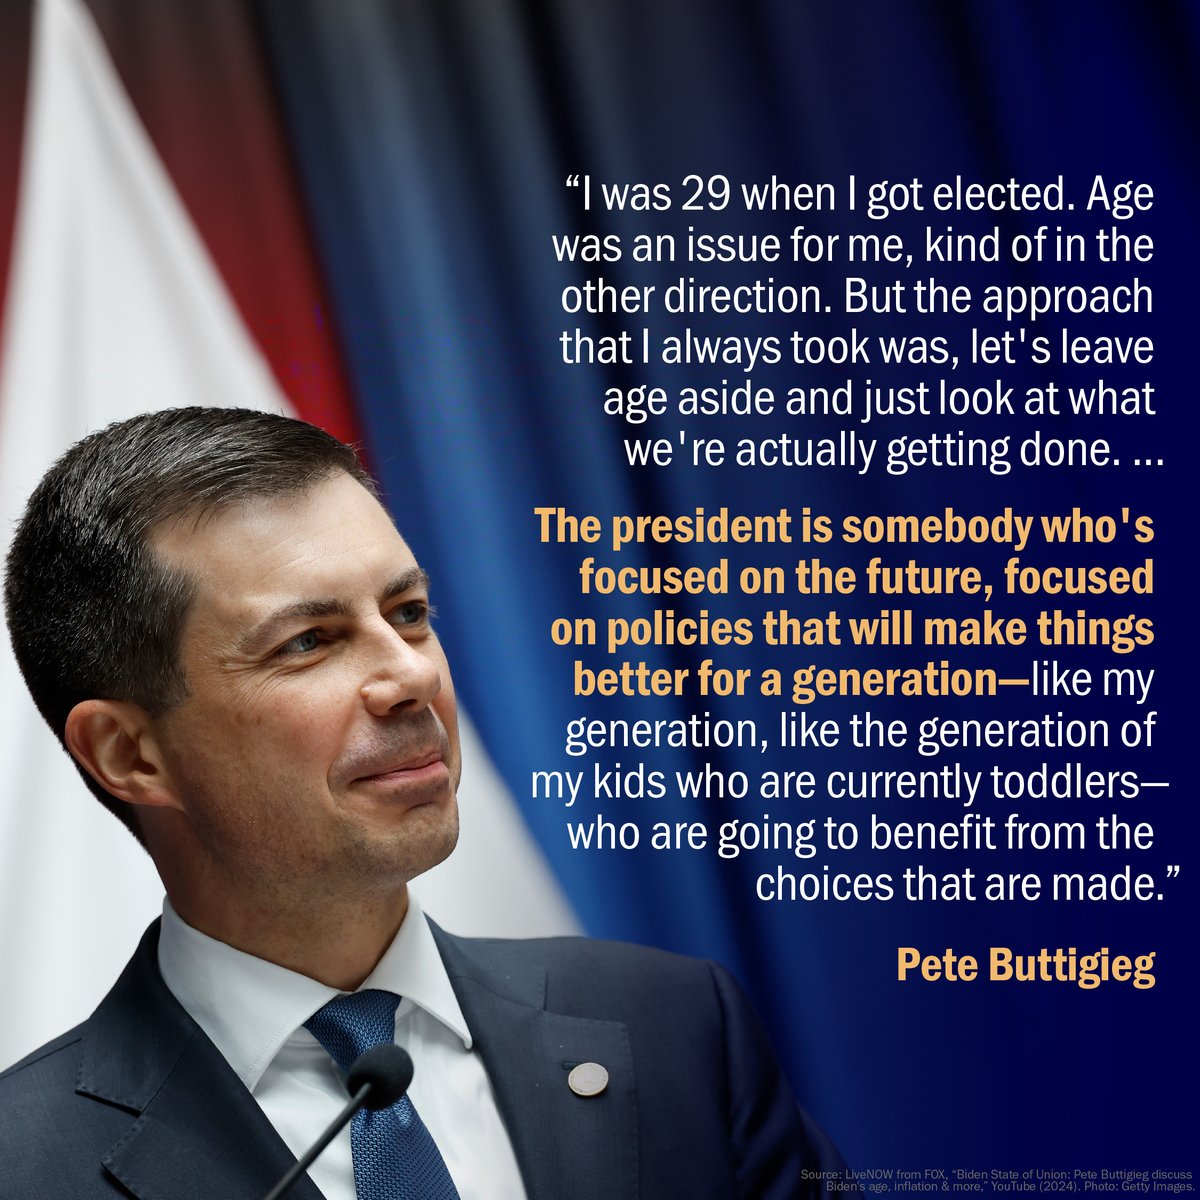 Just like @PeteButtigieg says—it’s the age of the ideas that matter, not the man.